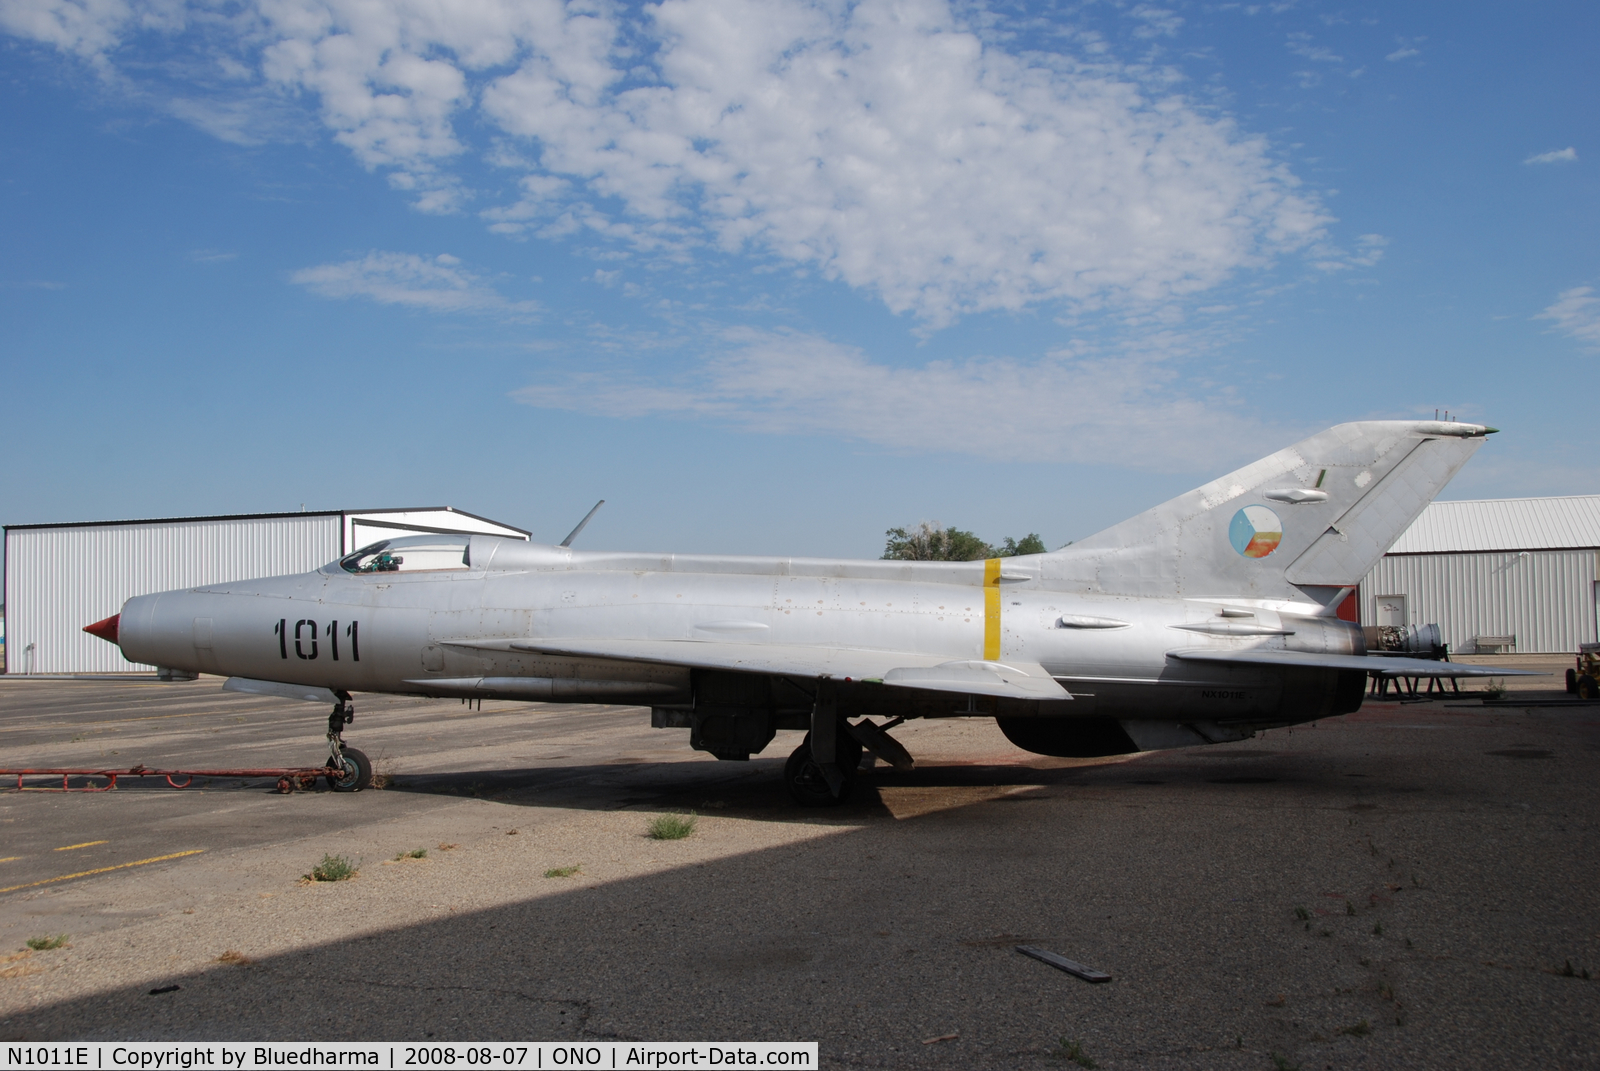 N1011E, Mikoyan-Gurevich MiG-21F-13 C/N 1011, Parked by hanger at airport.